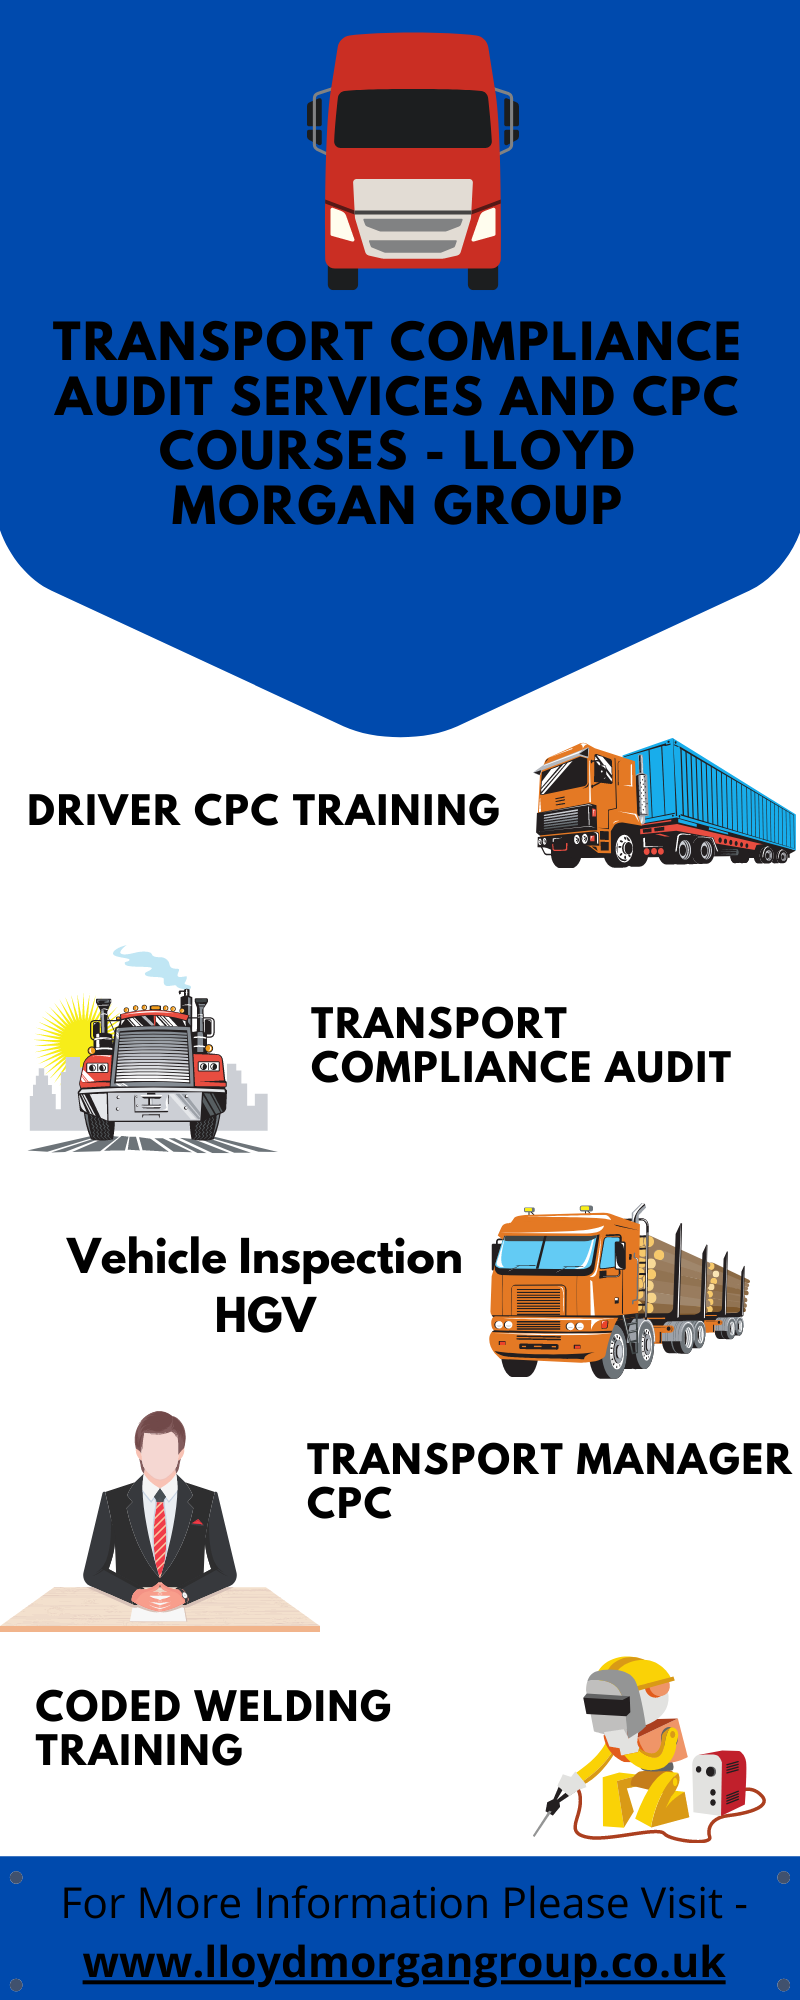 Coded Welding Courses Driver Cpc Courses Hgv Courses Transport Manager Cpc